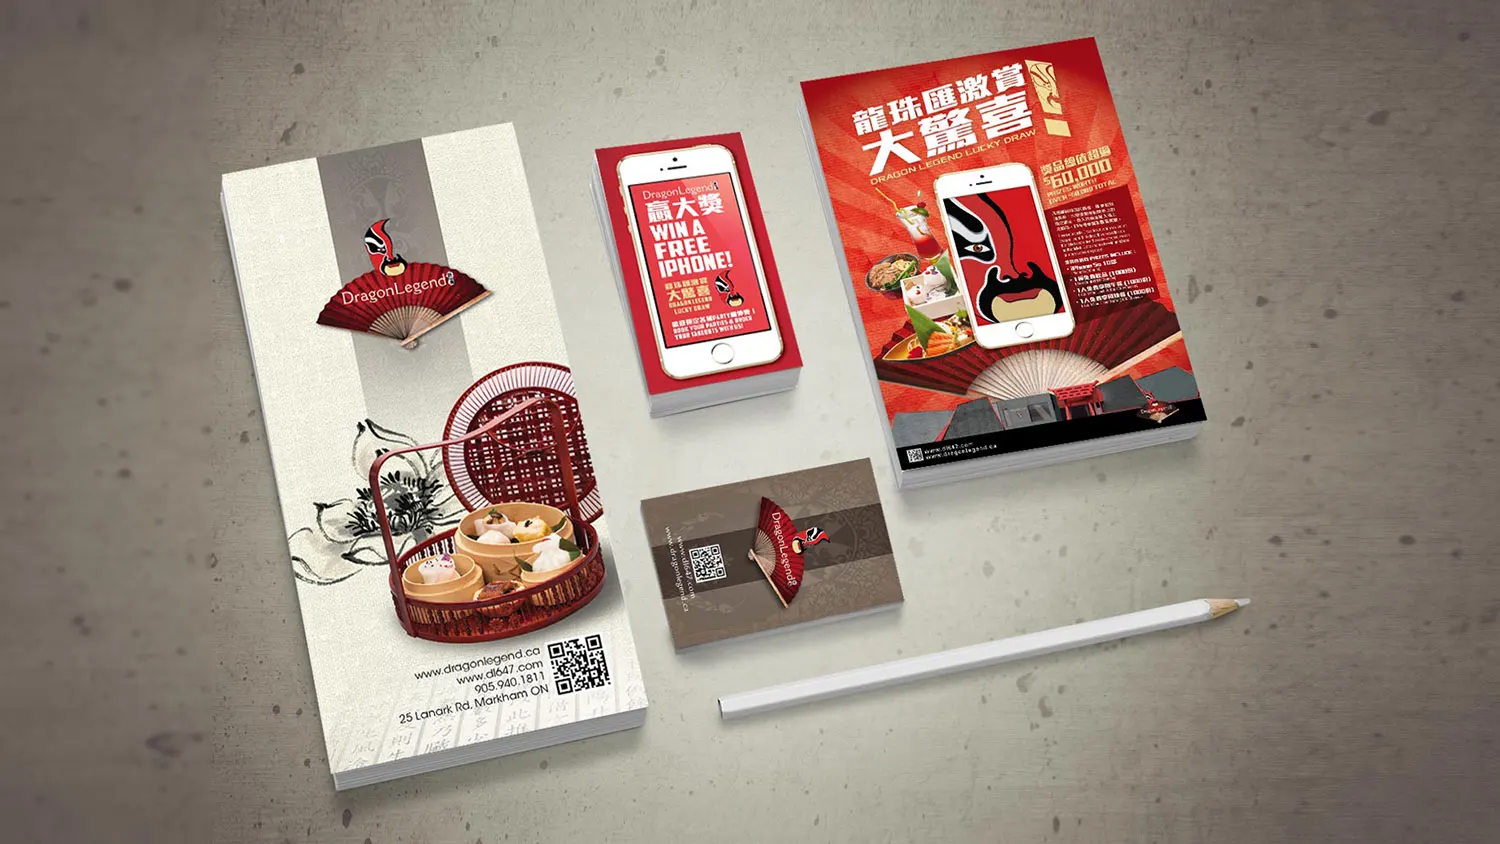 Graphic design project for Dragon Legend 龍珠匯. Designed stationeries for restaurant, able to print all the items in a timely and cost friendly manner.t promotion